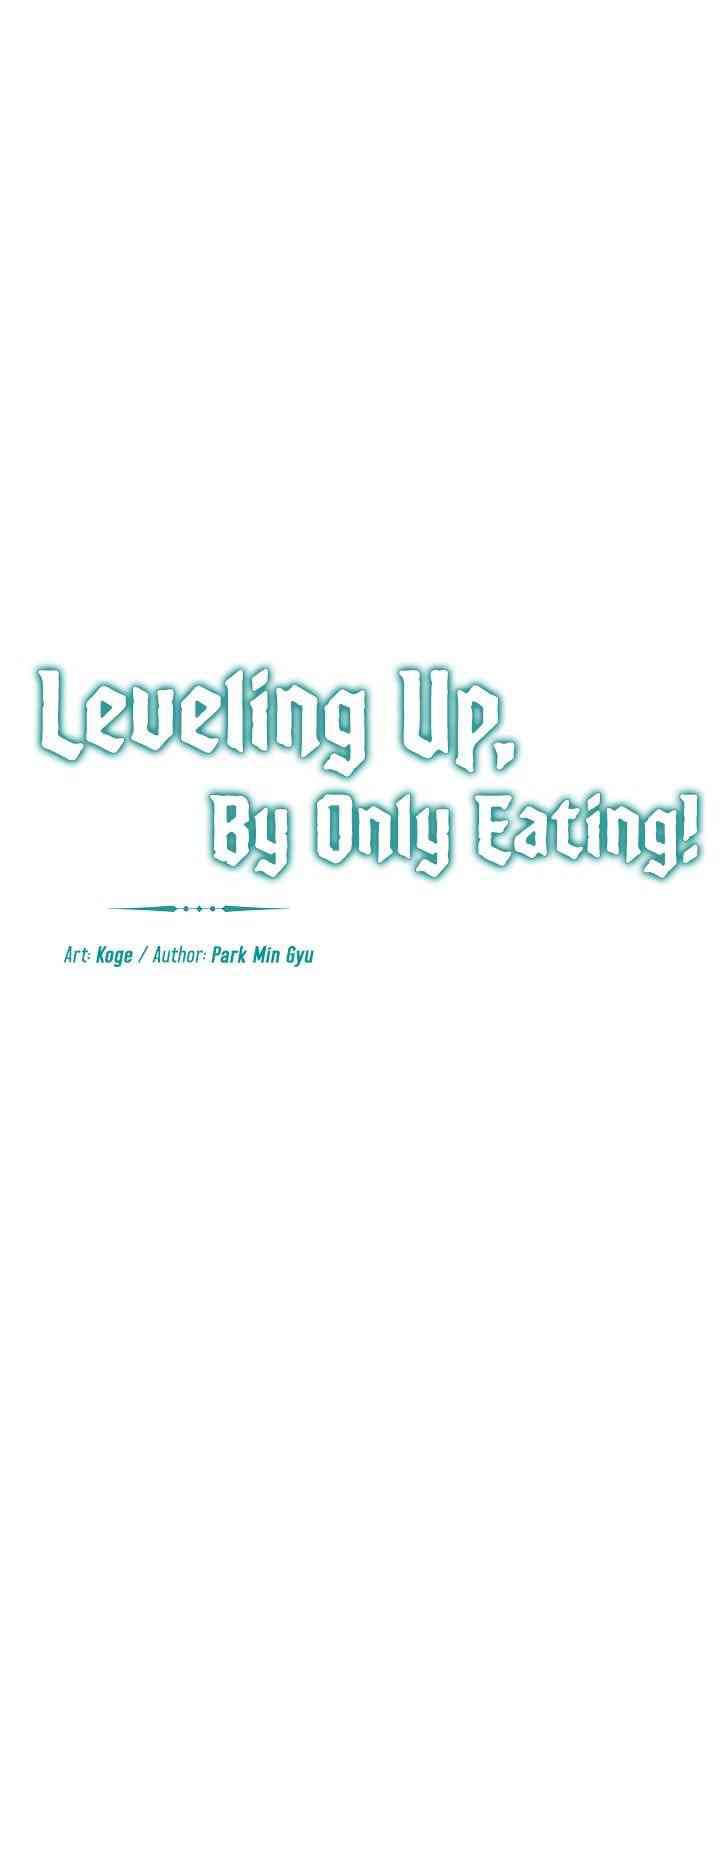 Leveling Up, By Only Eating!8 (12)